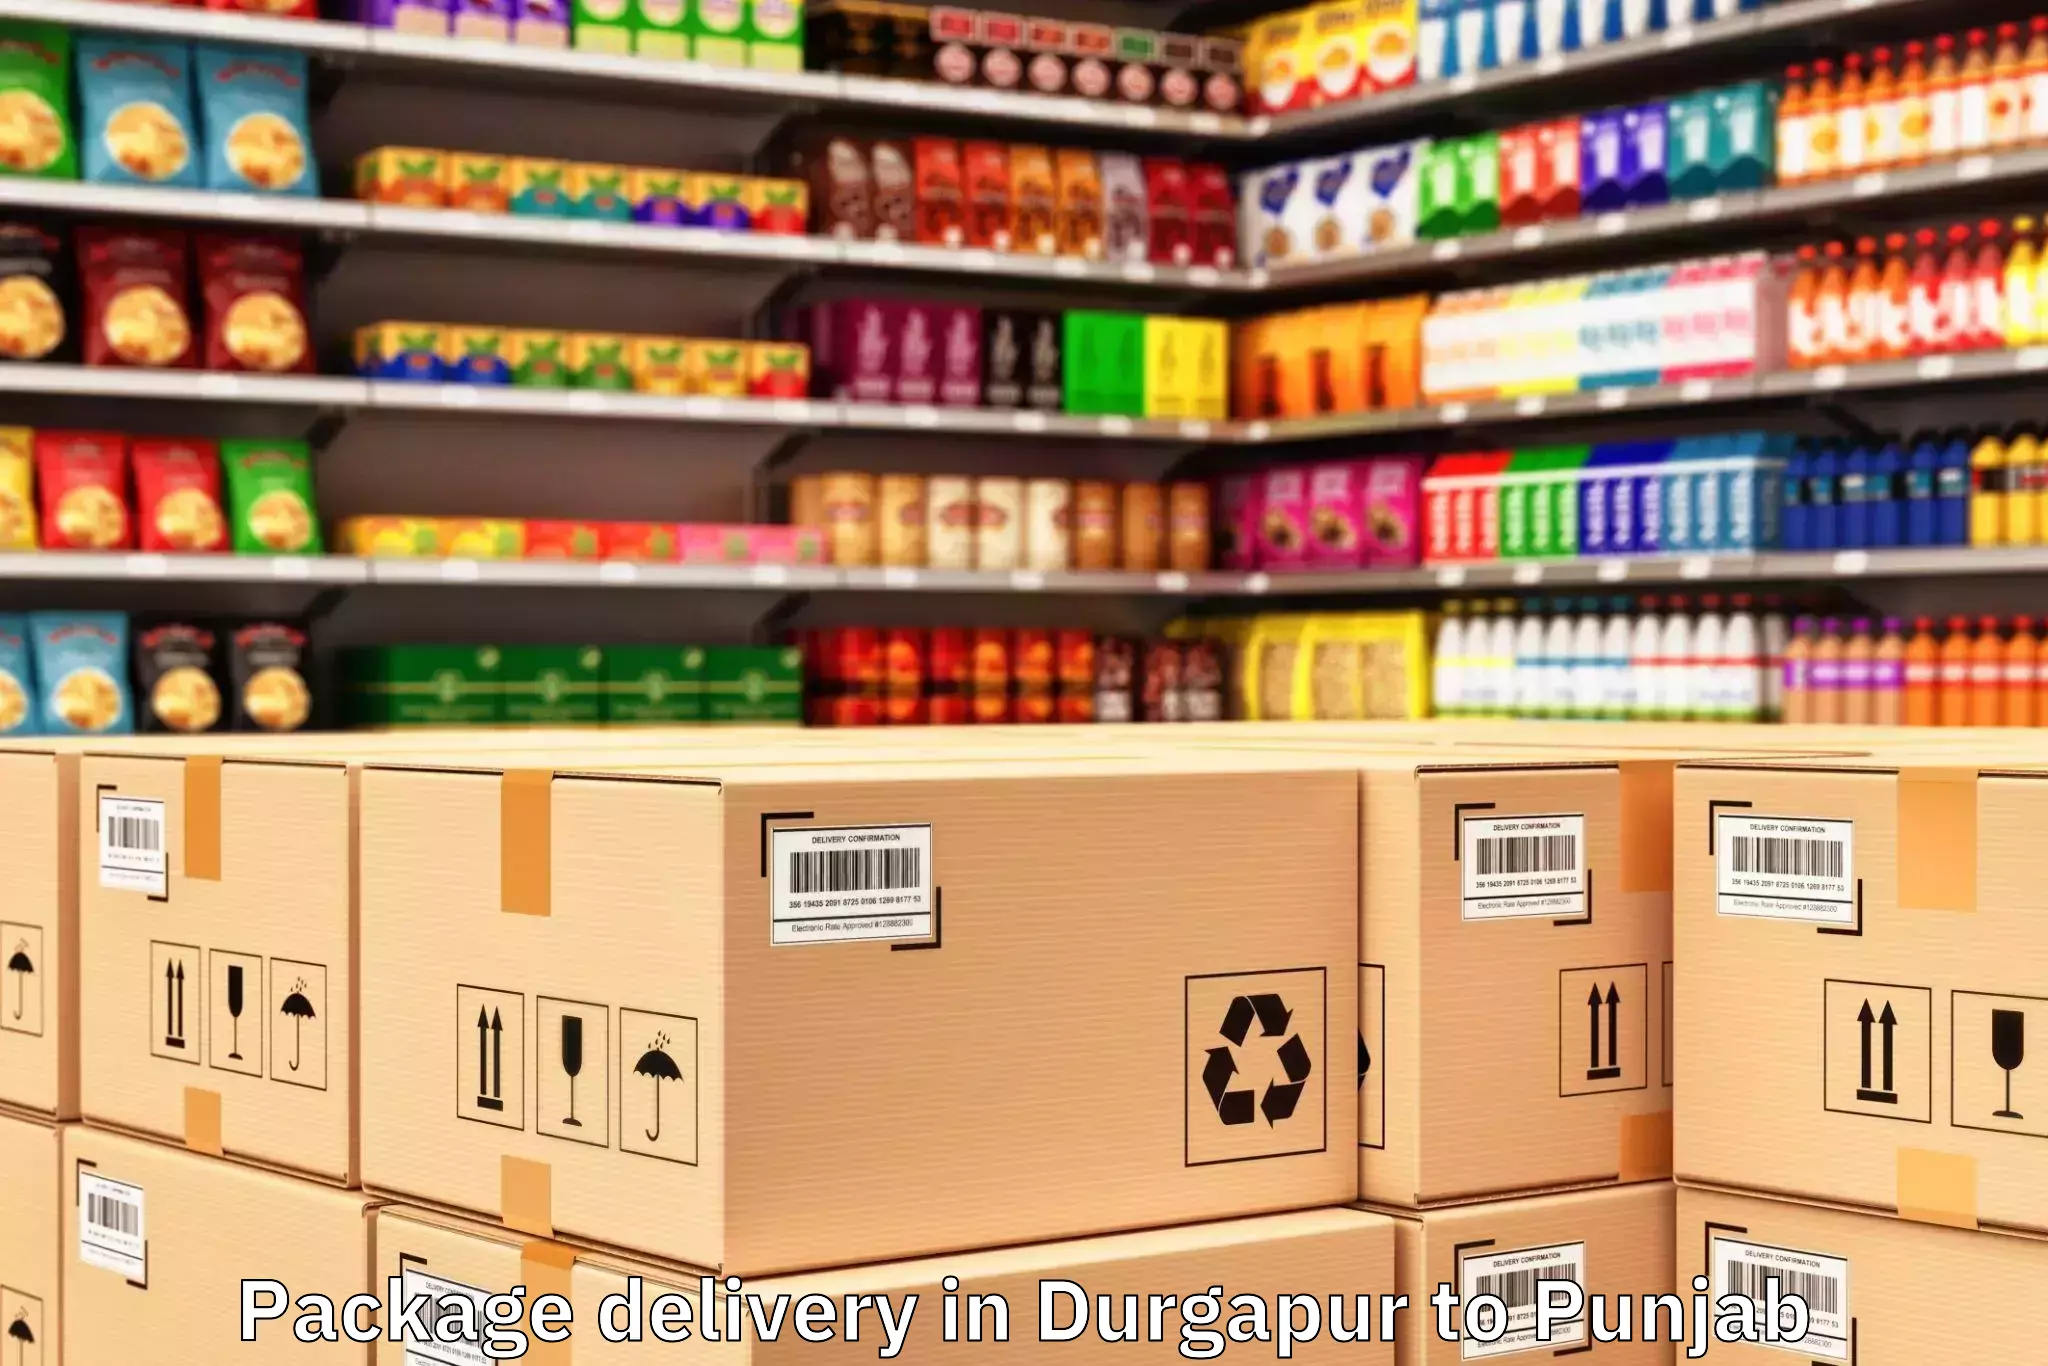 Efficient Durgapur to Tibi Package Delivery